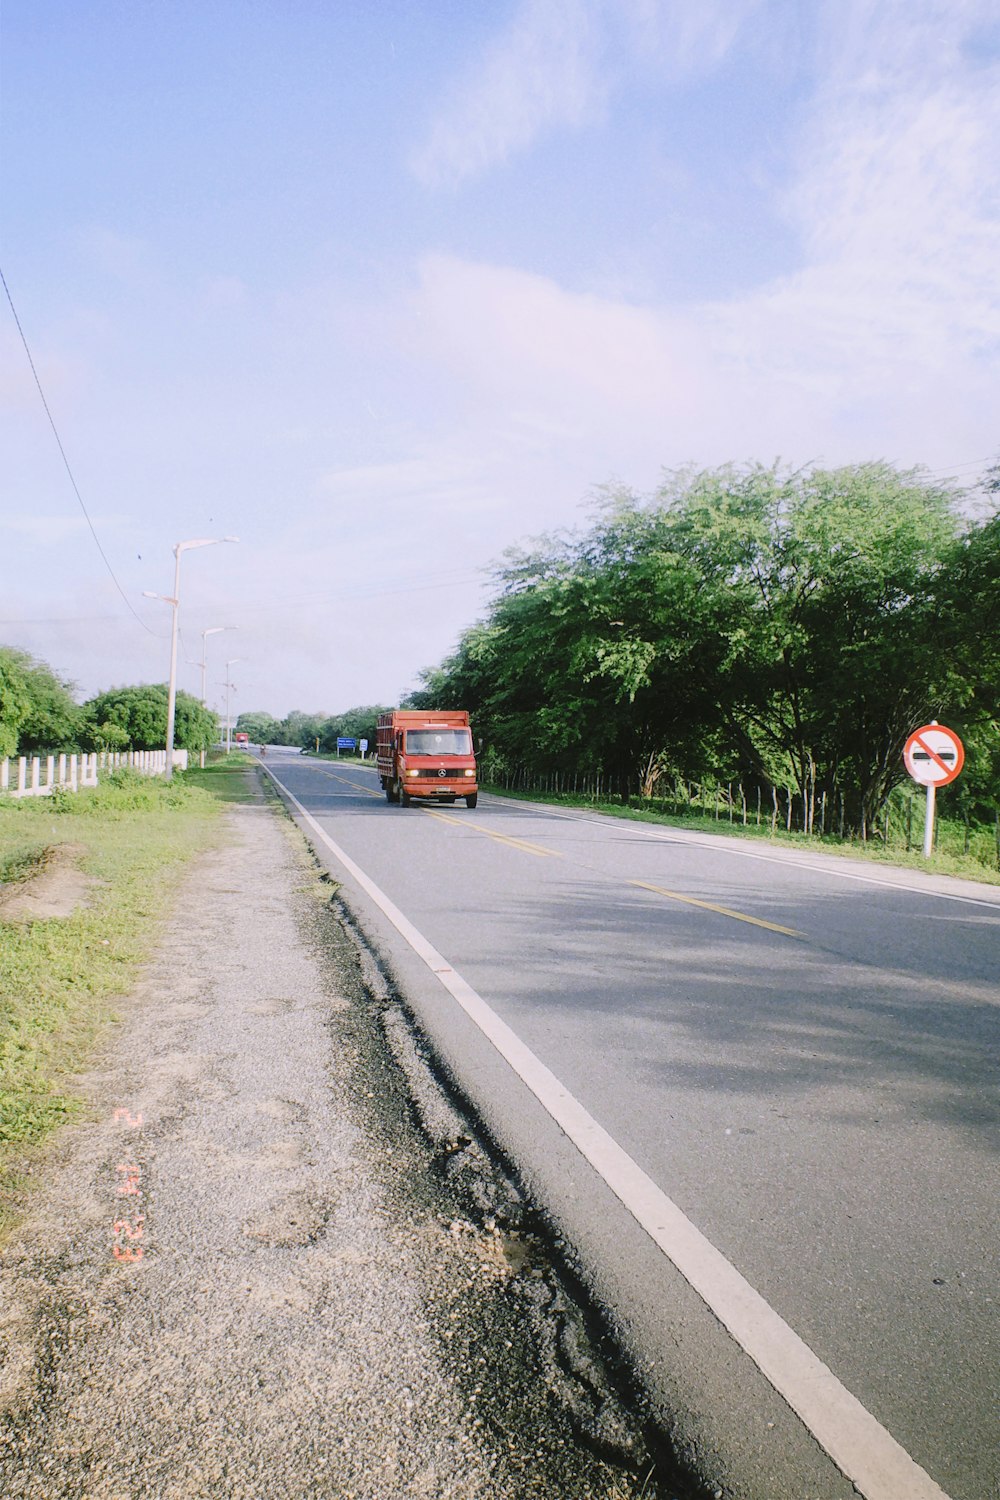 a red bus driving down a road next to a lush green field